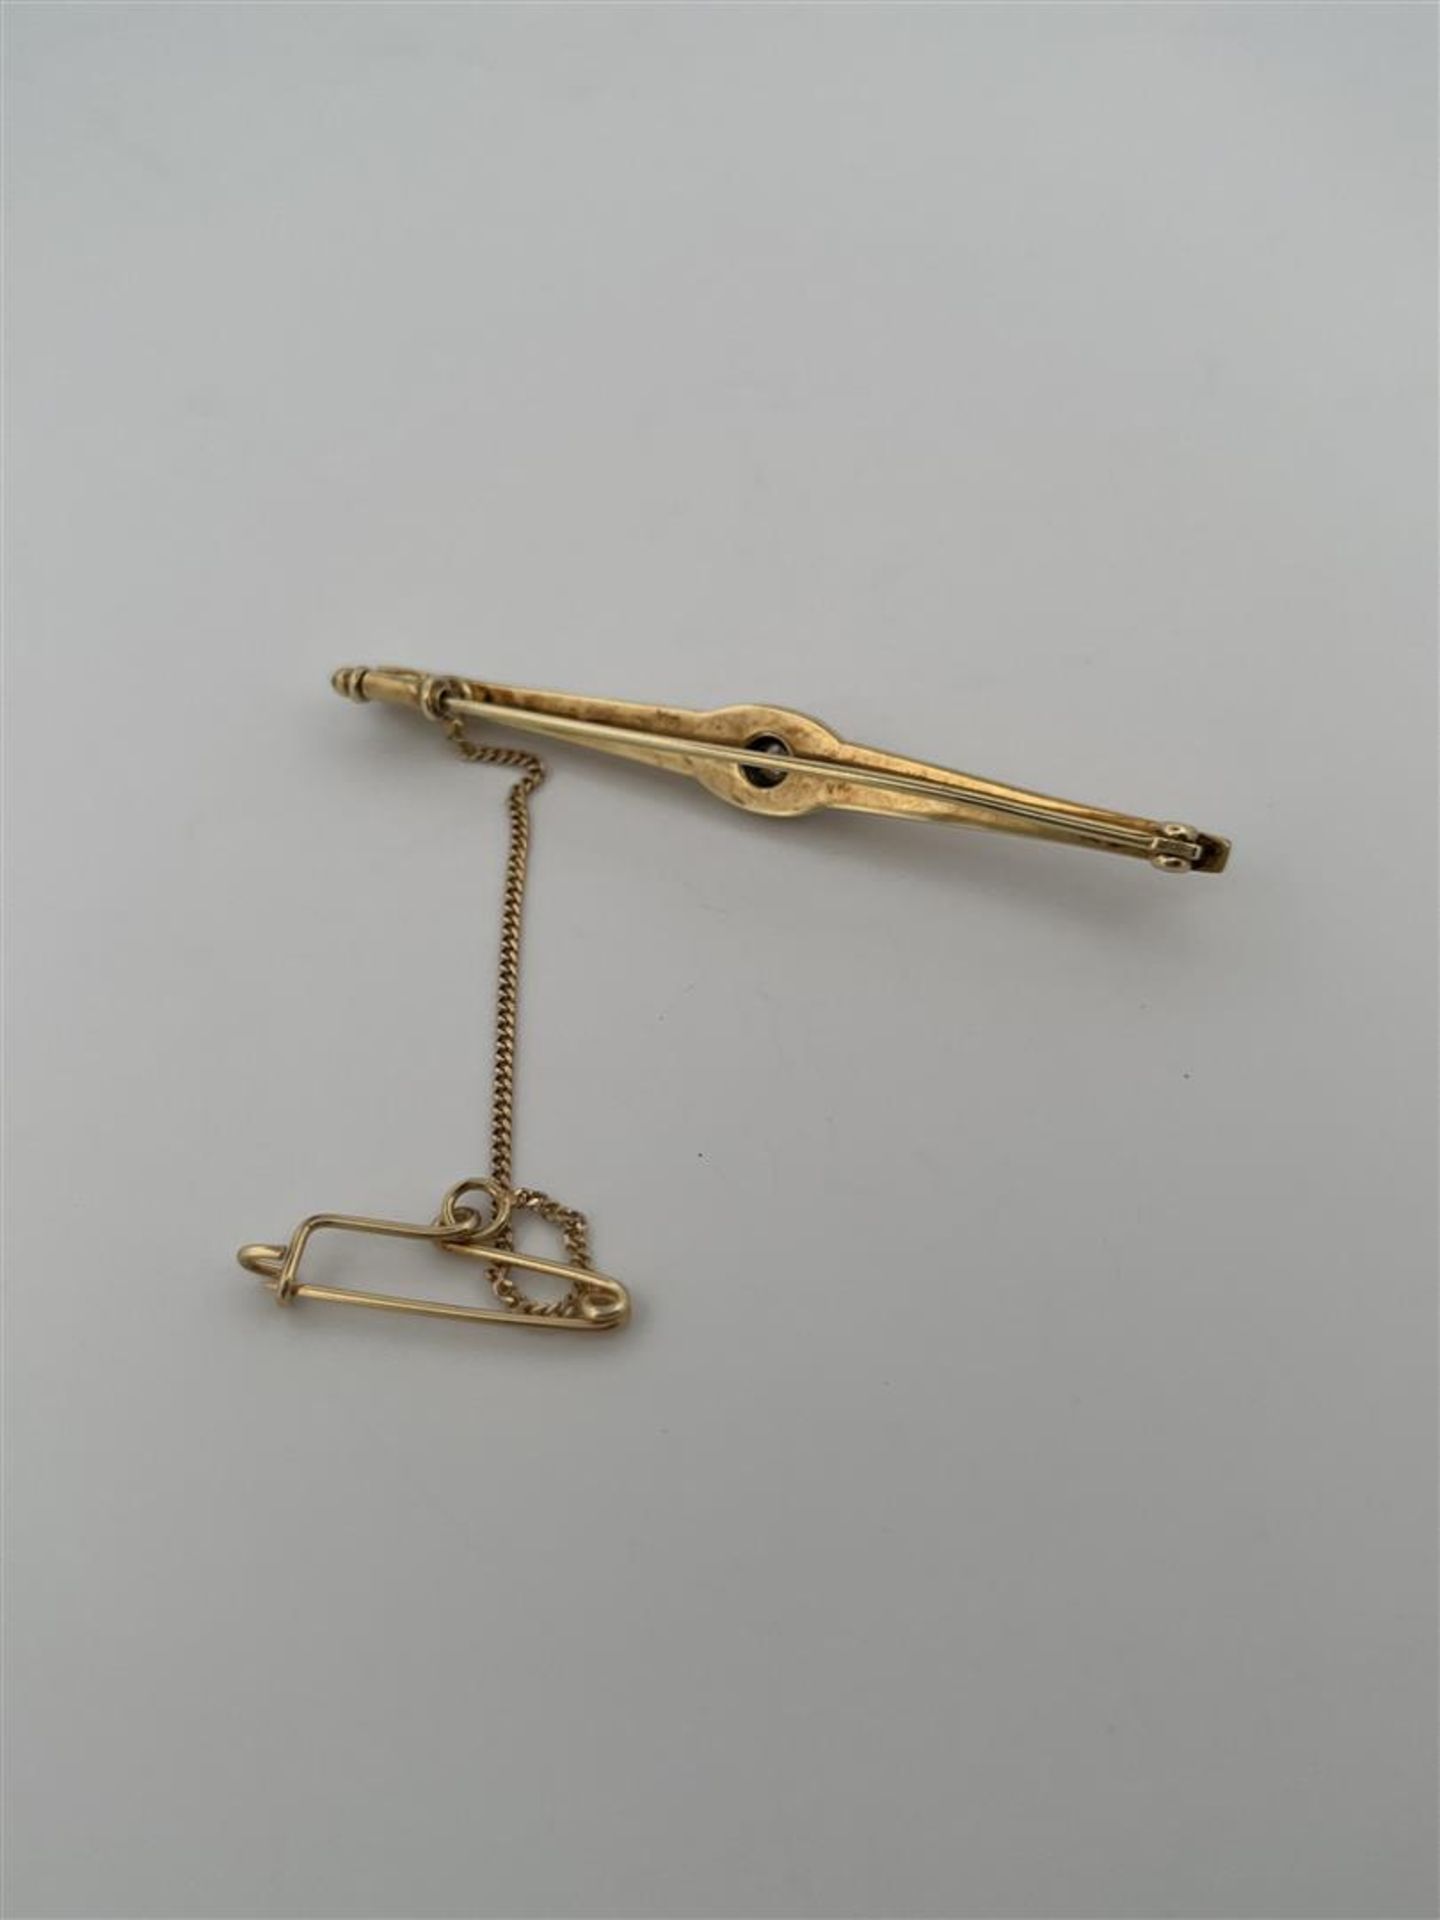 14kt yellow gold tie pin set with diamonds.
Beautiful tie pin with extra safety chain and pin, the t - Bild 4 aus 4